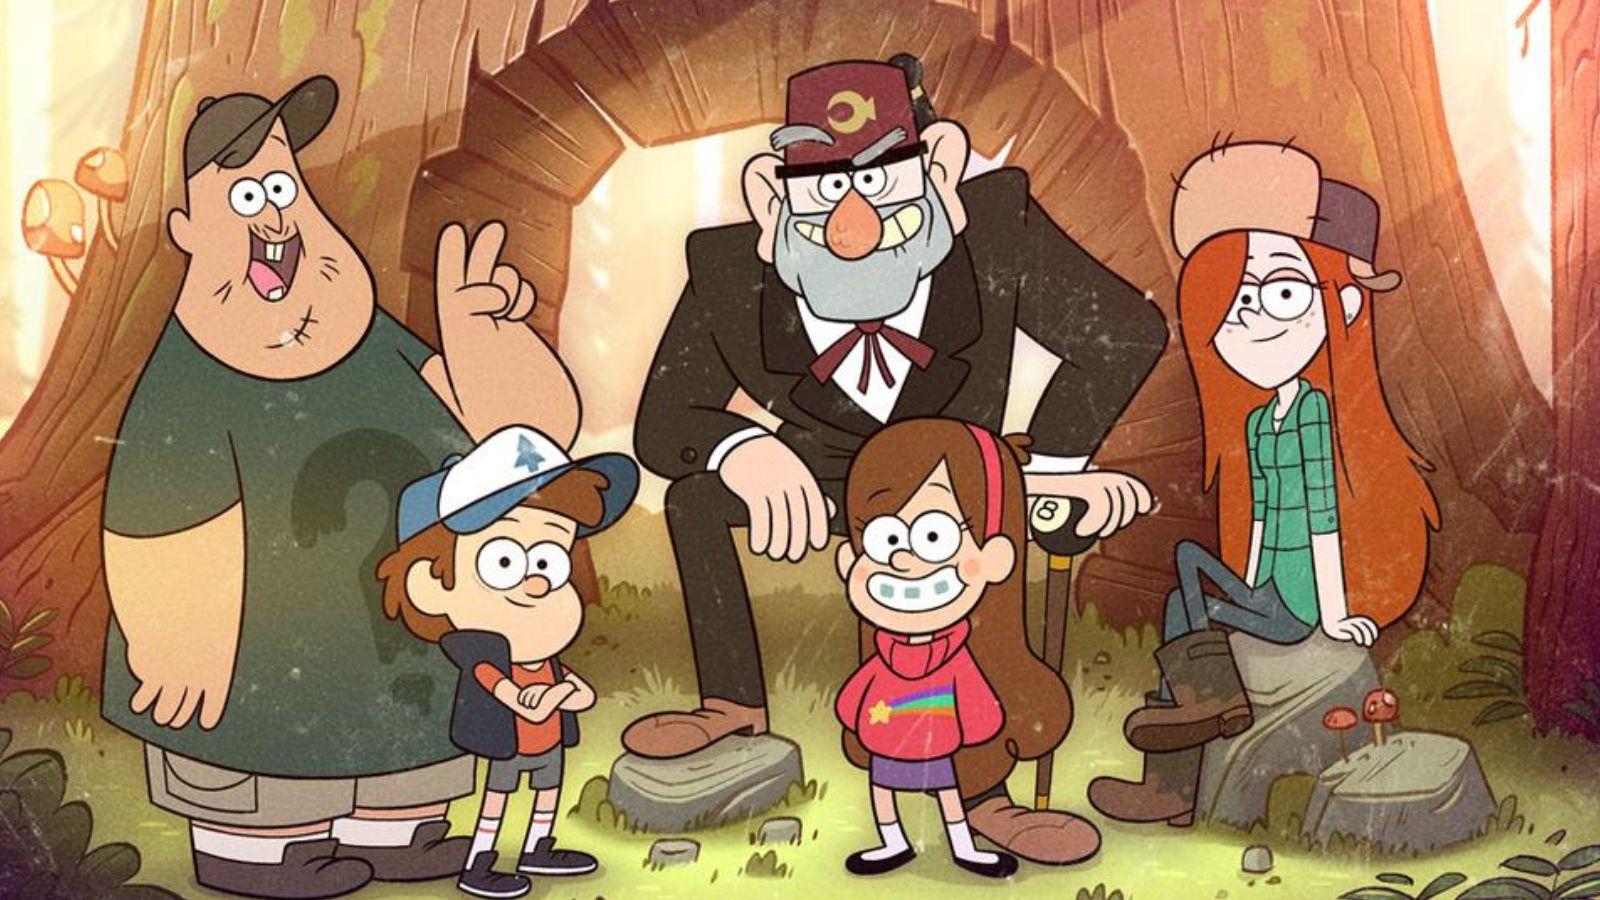 The cast of Gravity Falls